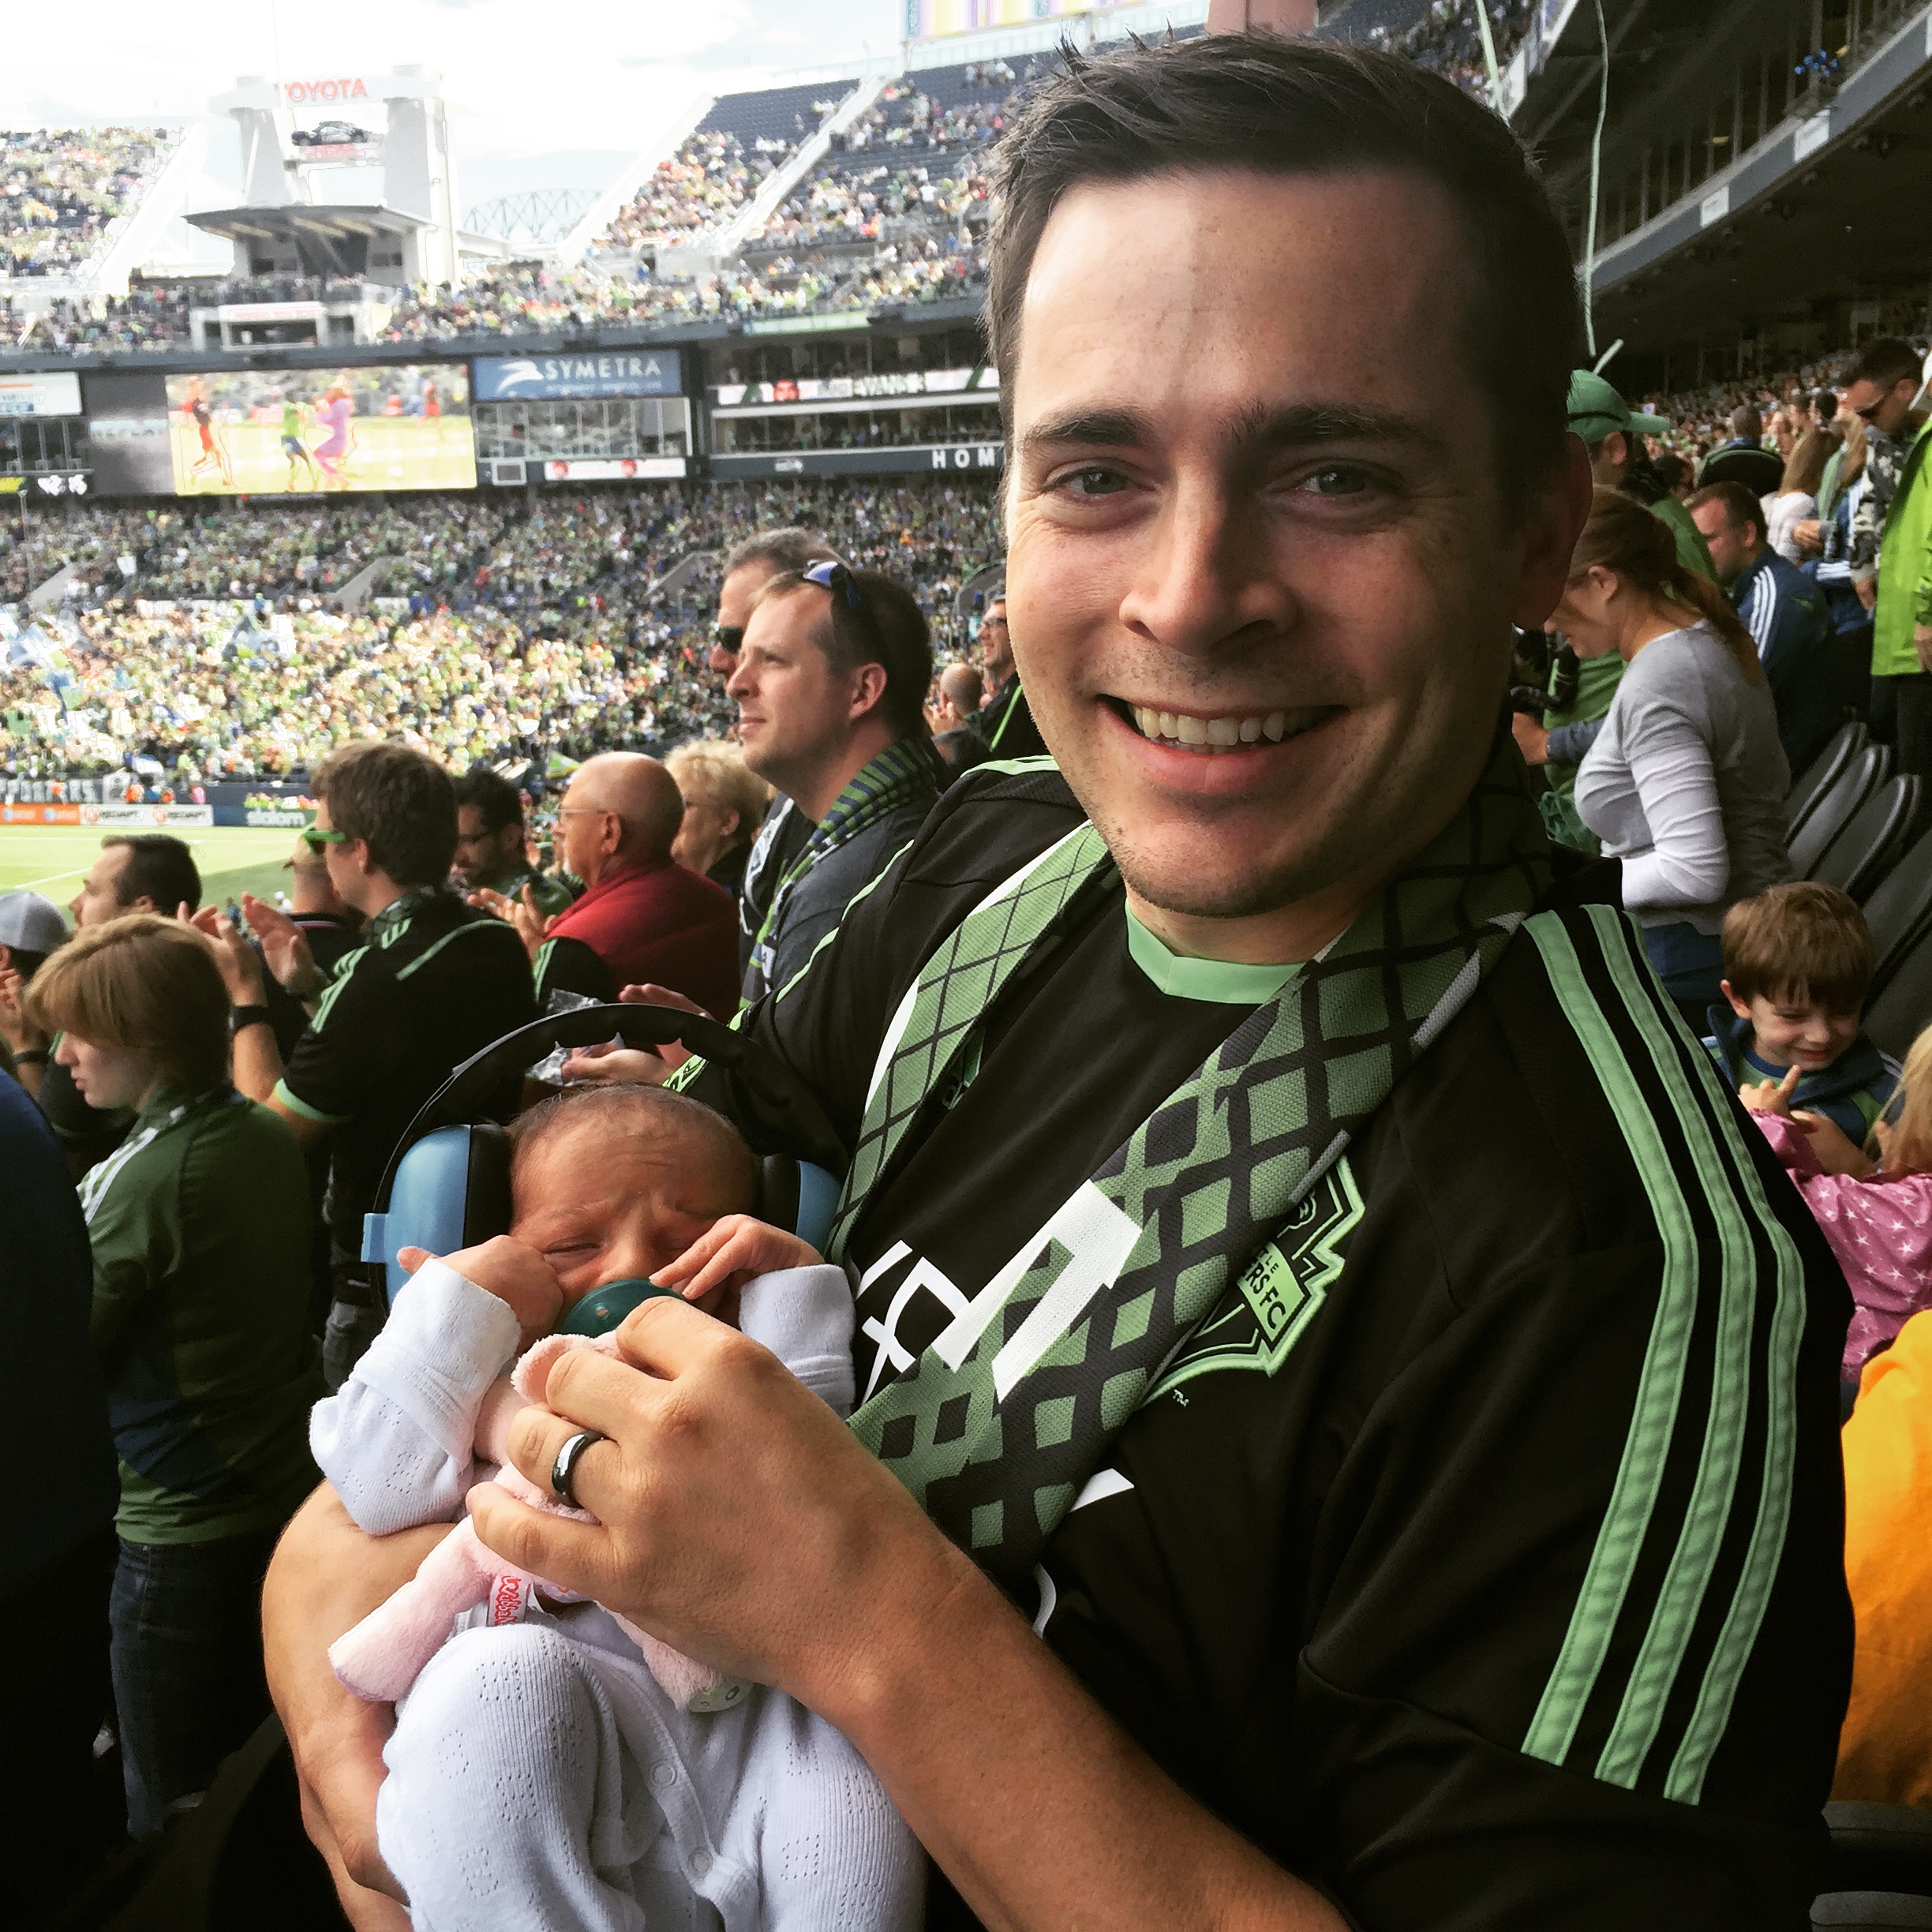 Go Sounders, Nate, and baby